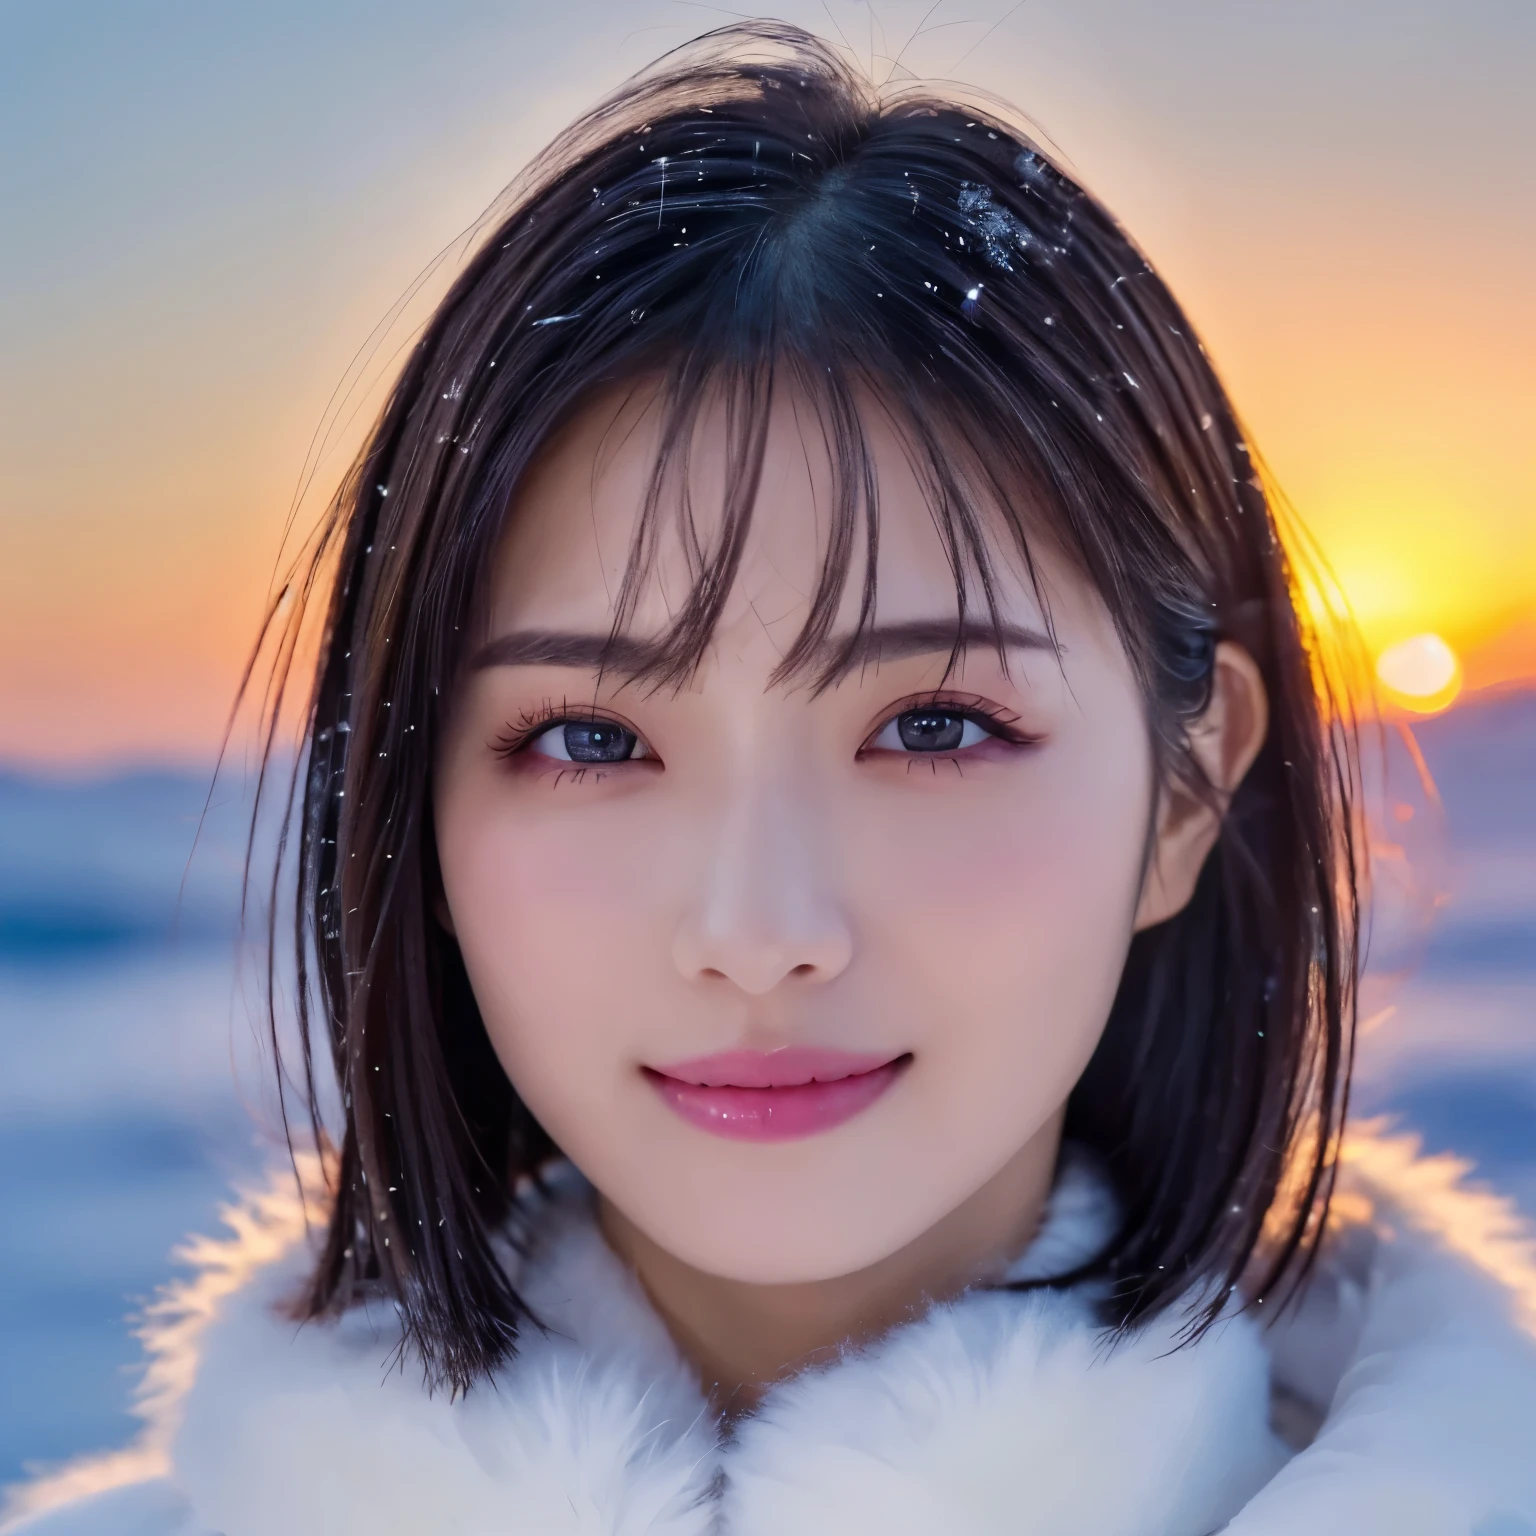 (highest quality、table top、8K、best image quality、Award-winning work)、1 girl、close up of face、smile looking at me、thick coat、Fur hood、perfect and most natural muffler、(frozen snow field in winter:1.1)、Icy ground、(romantic sunset:1.2)、(fantastic starry sky:1.2)、(Starry sky and sunset:1.1)、(It&#39;s snowing:1.1)、(Tyndall effect:1.1)、sunset、epic movie lighting、short hair、(accurate anatomy:1.1)、Ultra high definition beauty face、long eyelashes、natural makeup、ultra high definition hair、ultra high resolution eyes、(Beautiful skin that shines in ultra-high resolution:1.1)、Super high resolution glossy lips